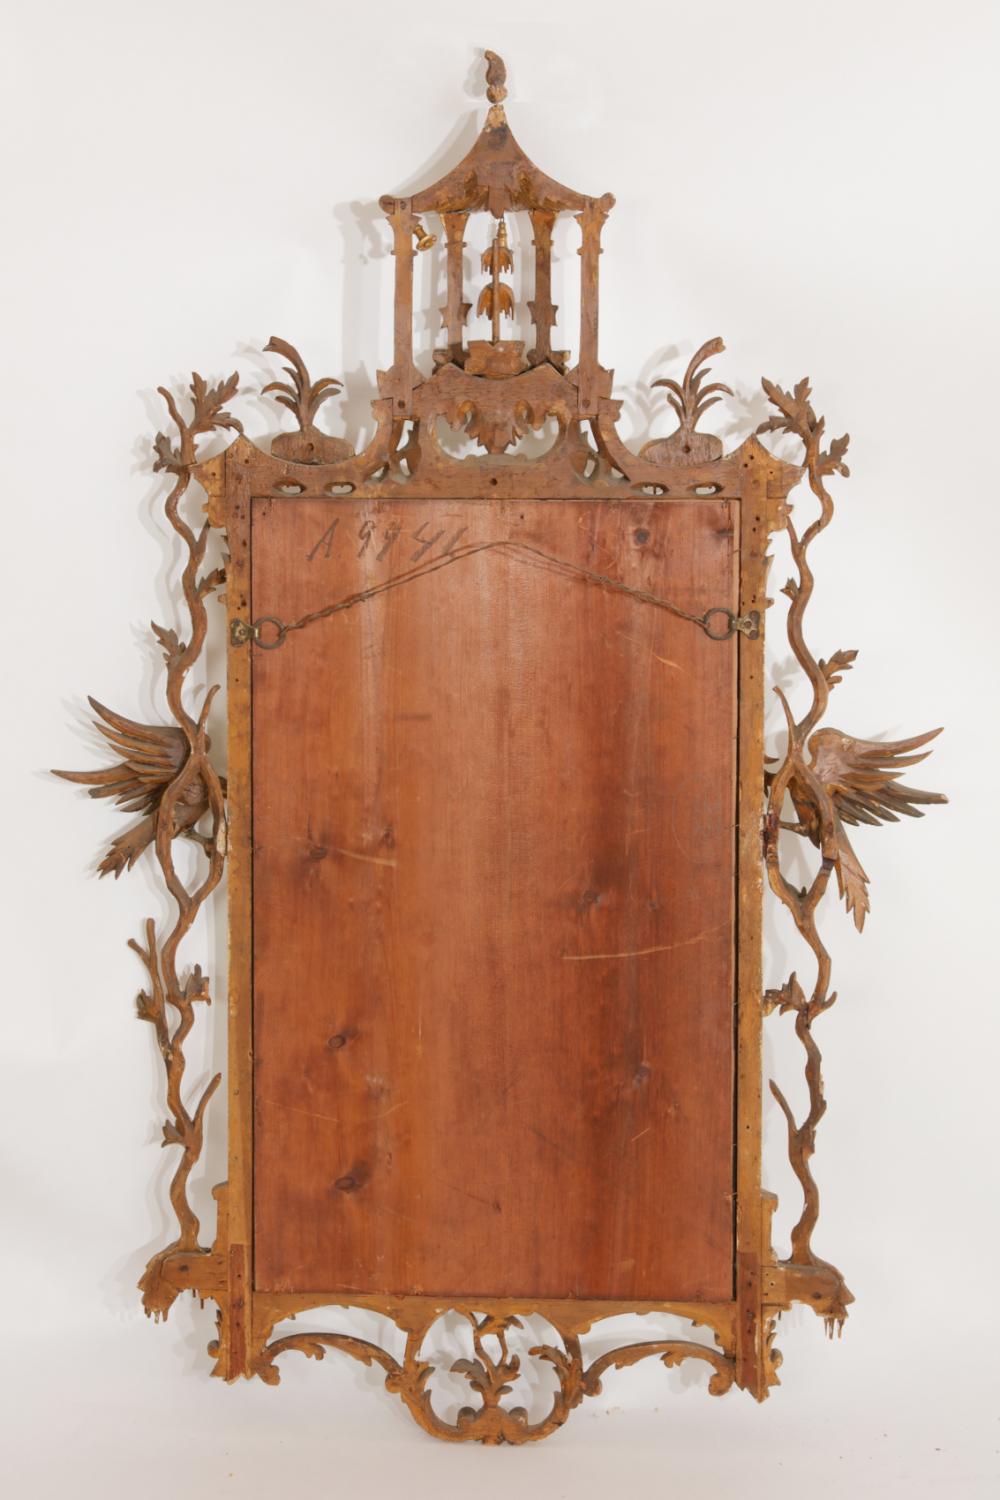 Chippendale Style Giltwood Mirror With Hoho Birds, 19 Century 6